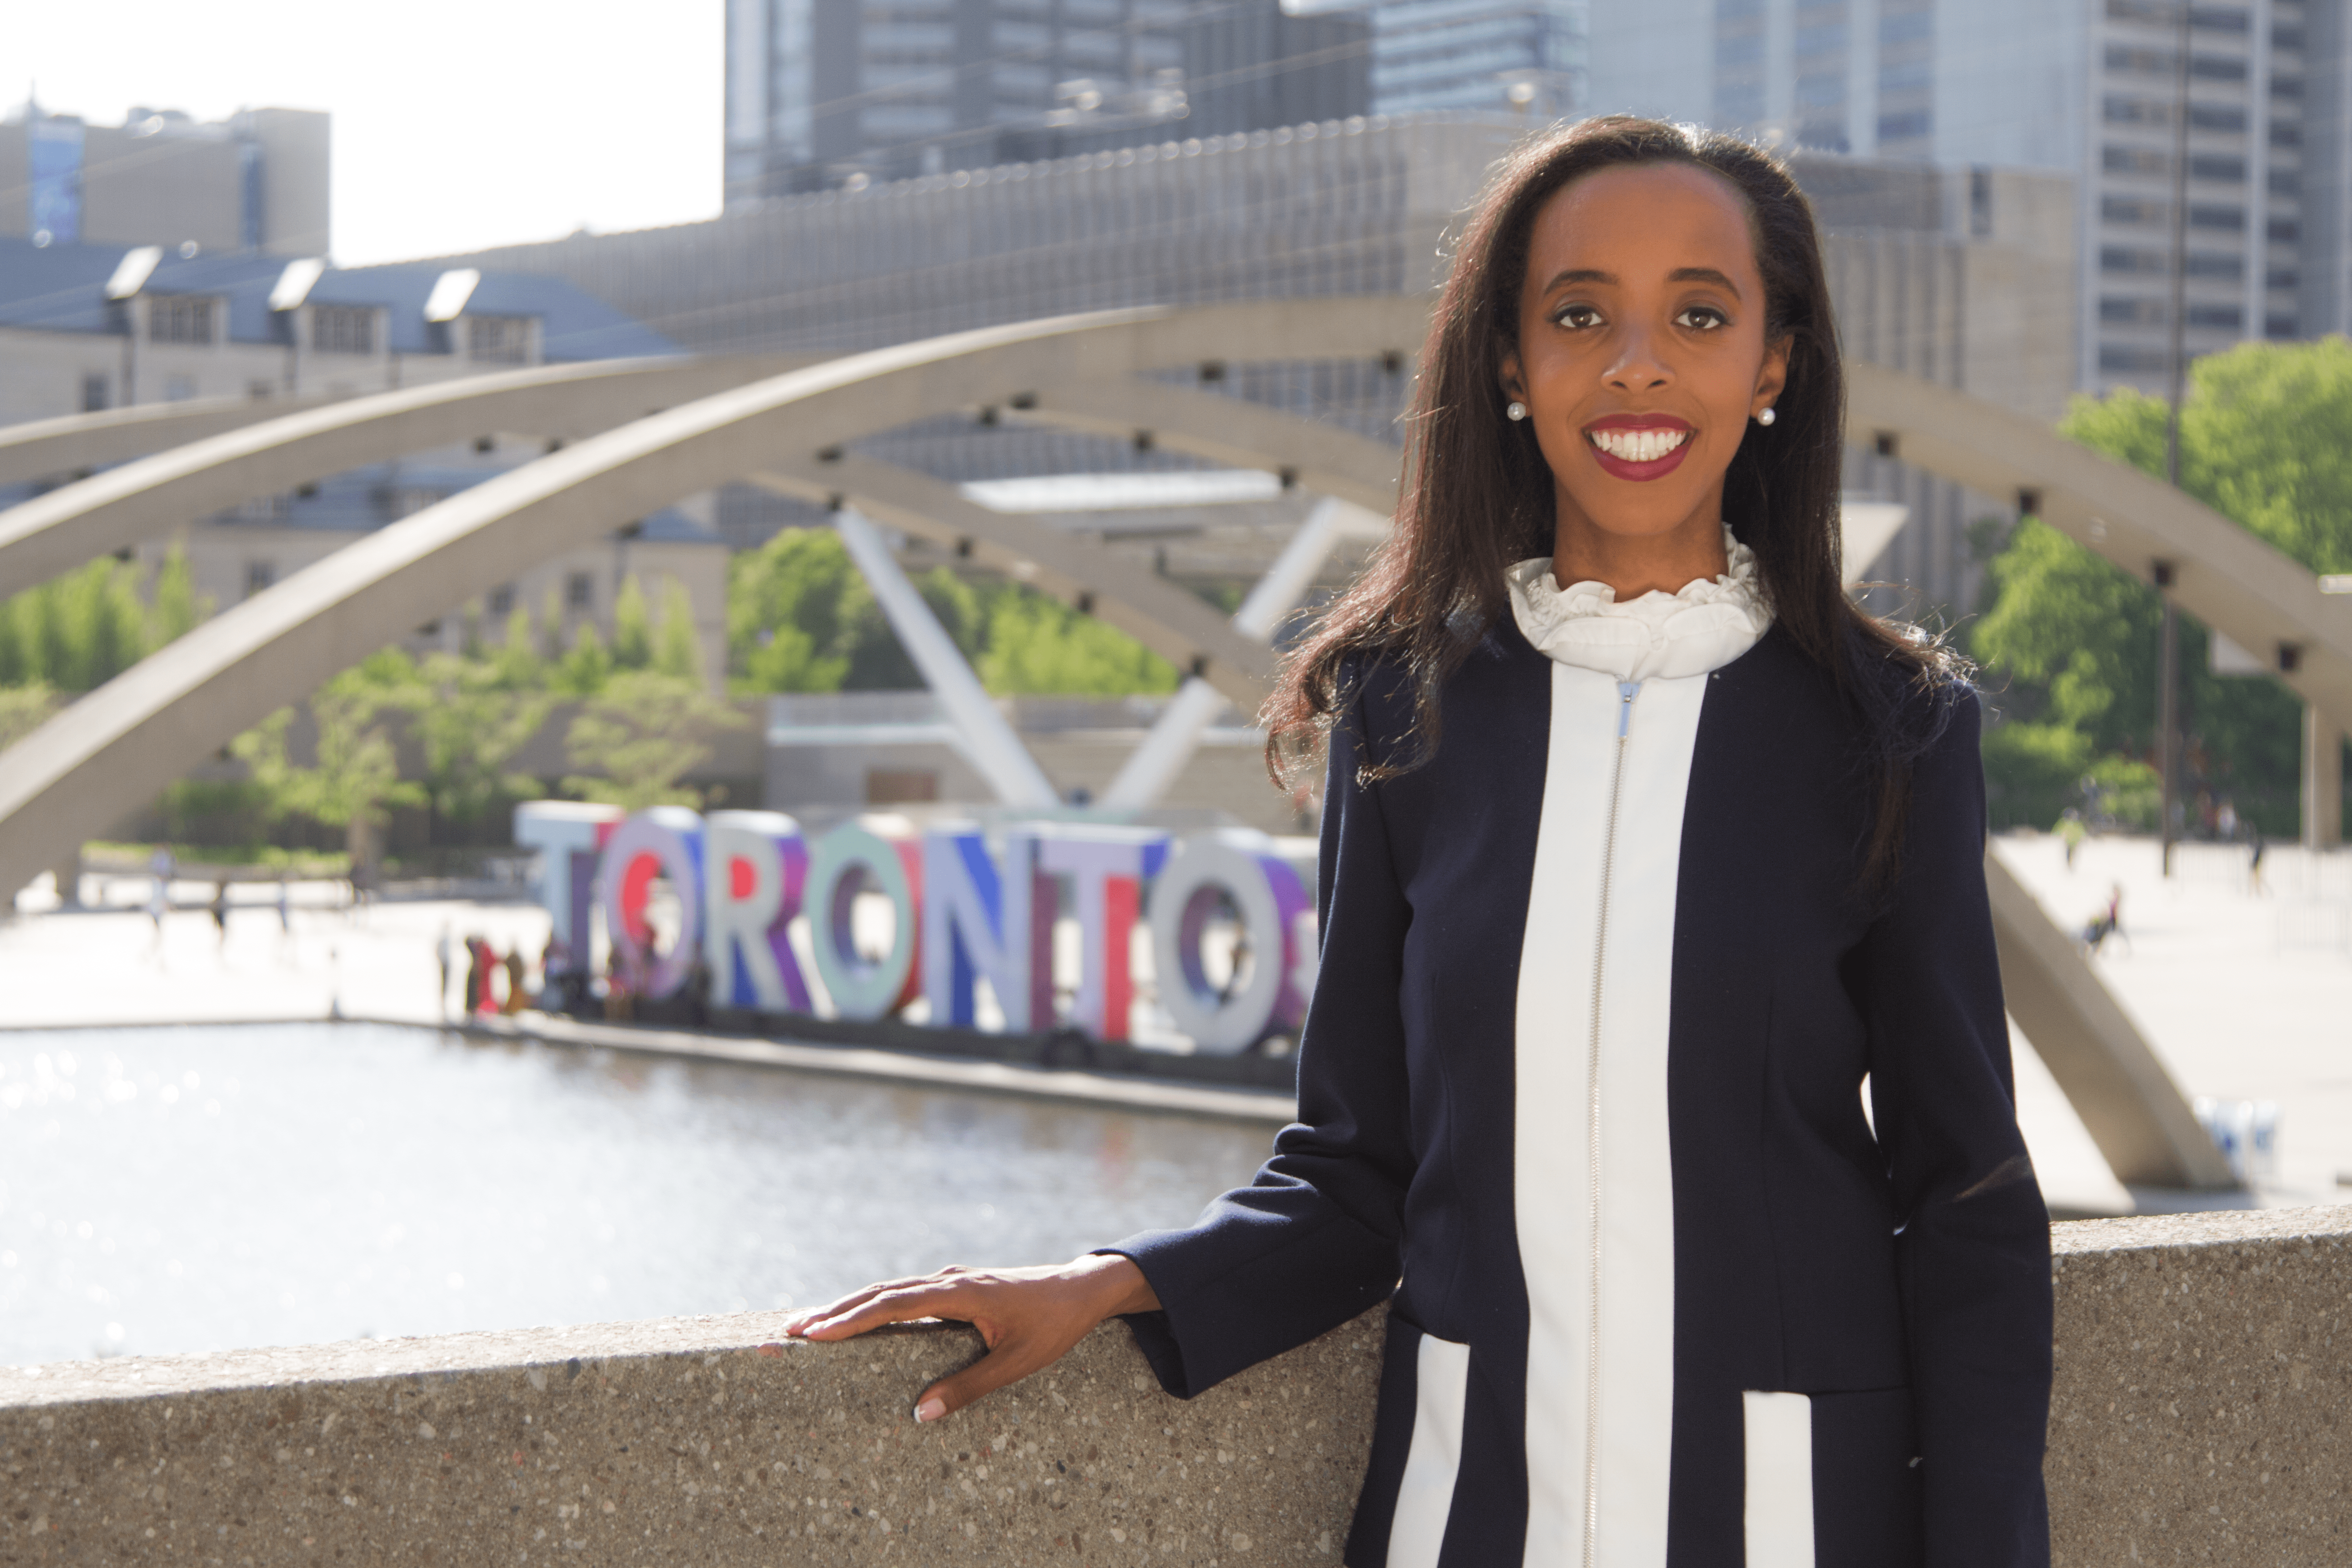 A Picture of Saron Gebresellassi standing in front of the Toronto sign, in front of City Hall